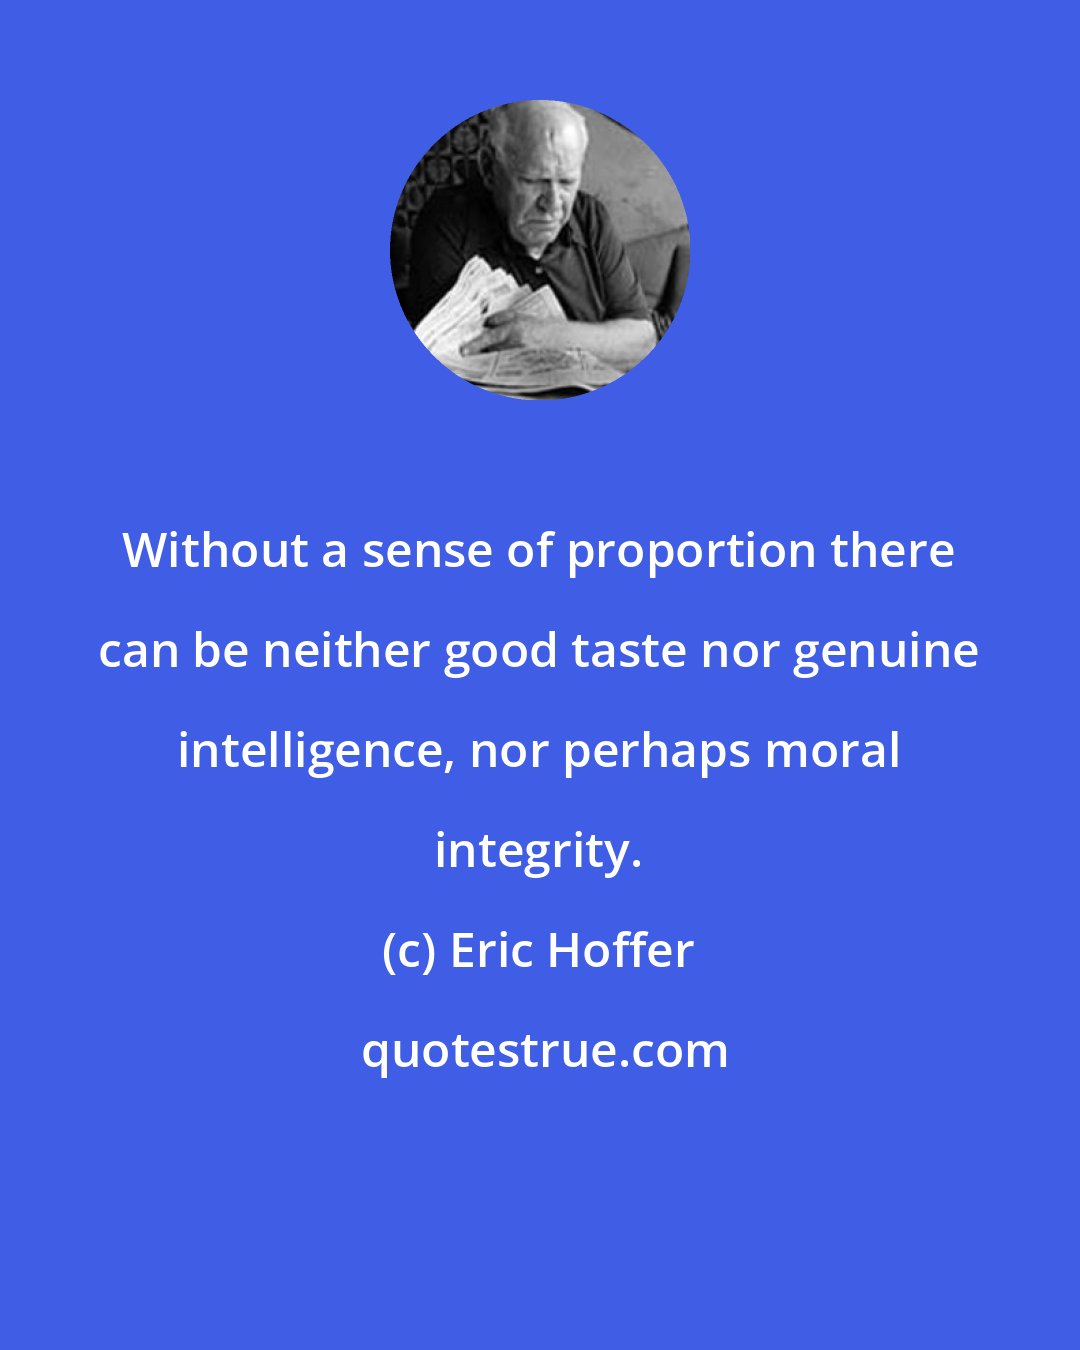 Eric Hoffer: Without a sense of proportion there can be neither good taste nor genuine intelligence, nor perhaps moral integrity.